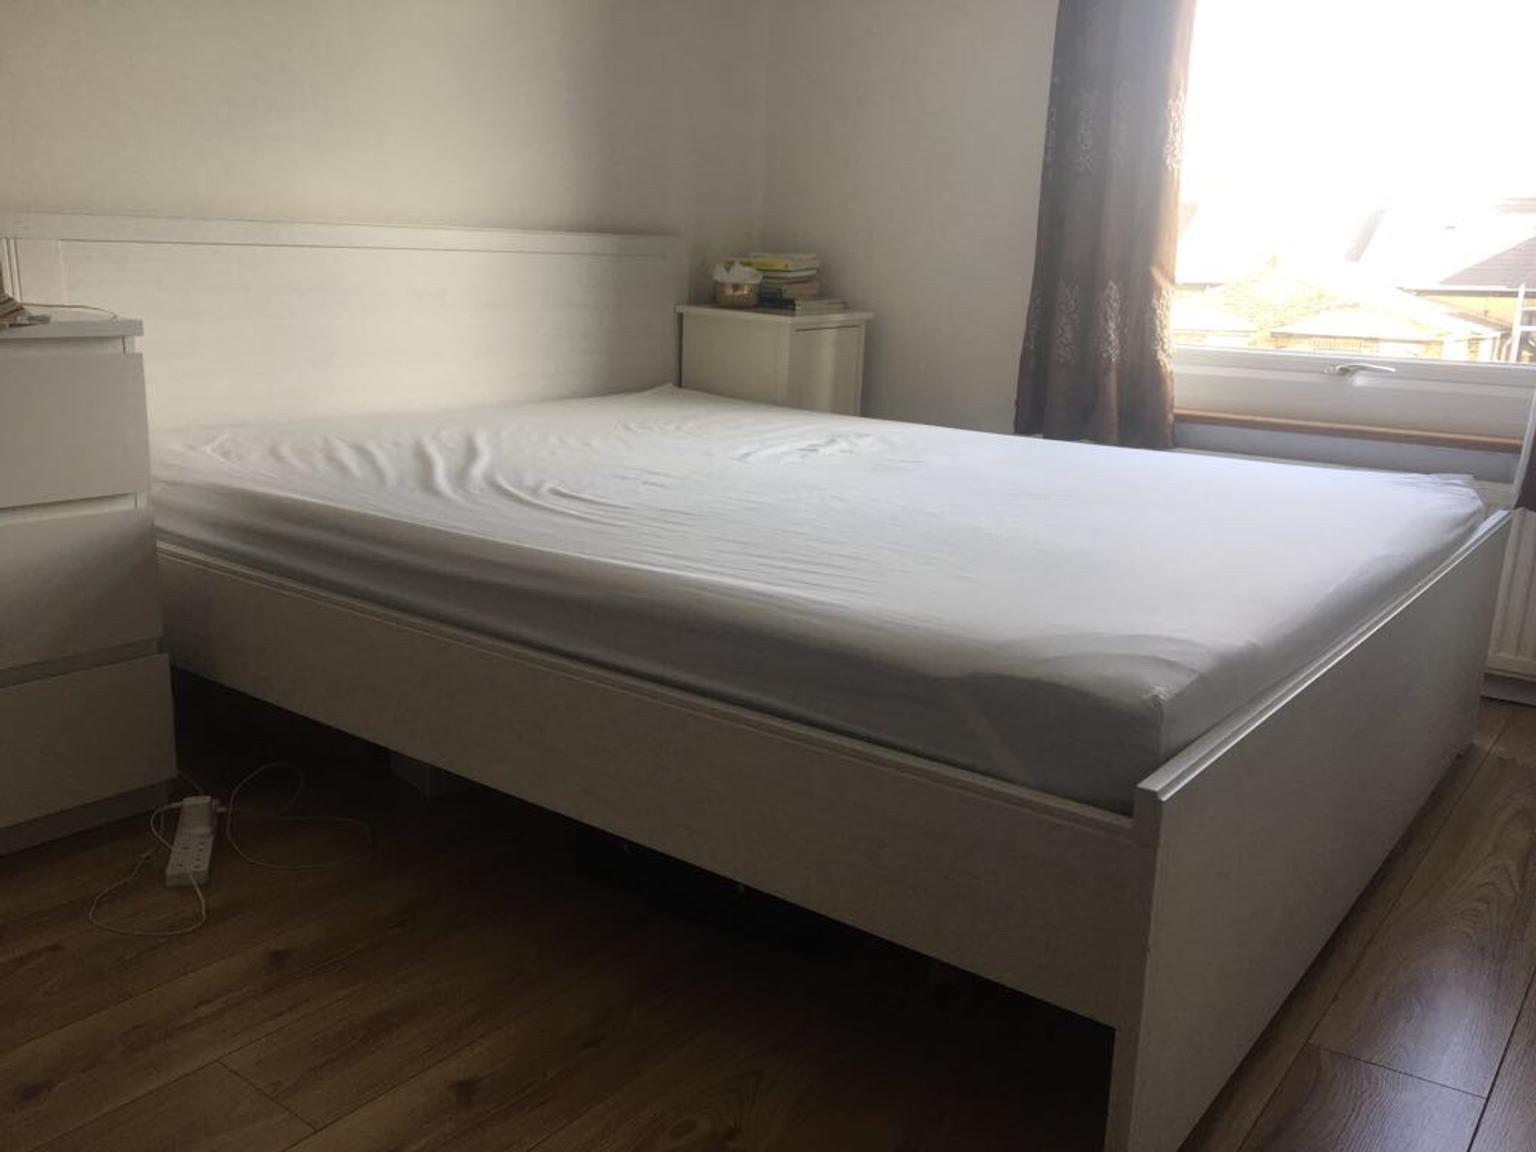 Ikea Brusali King Size Bed Including, White Wooden Bed Frame King Size Ikea